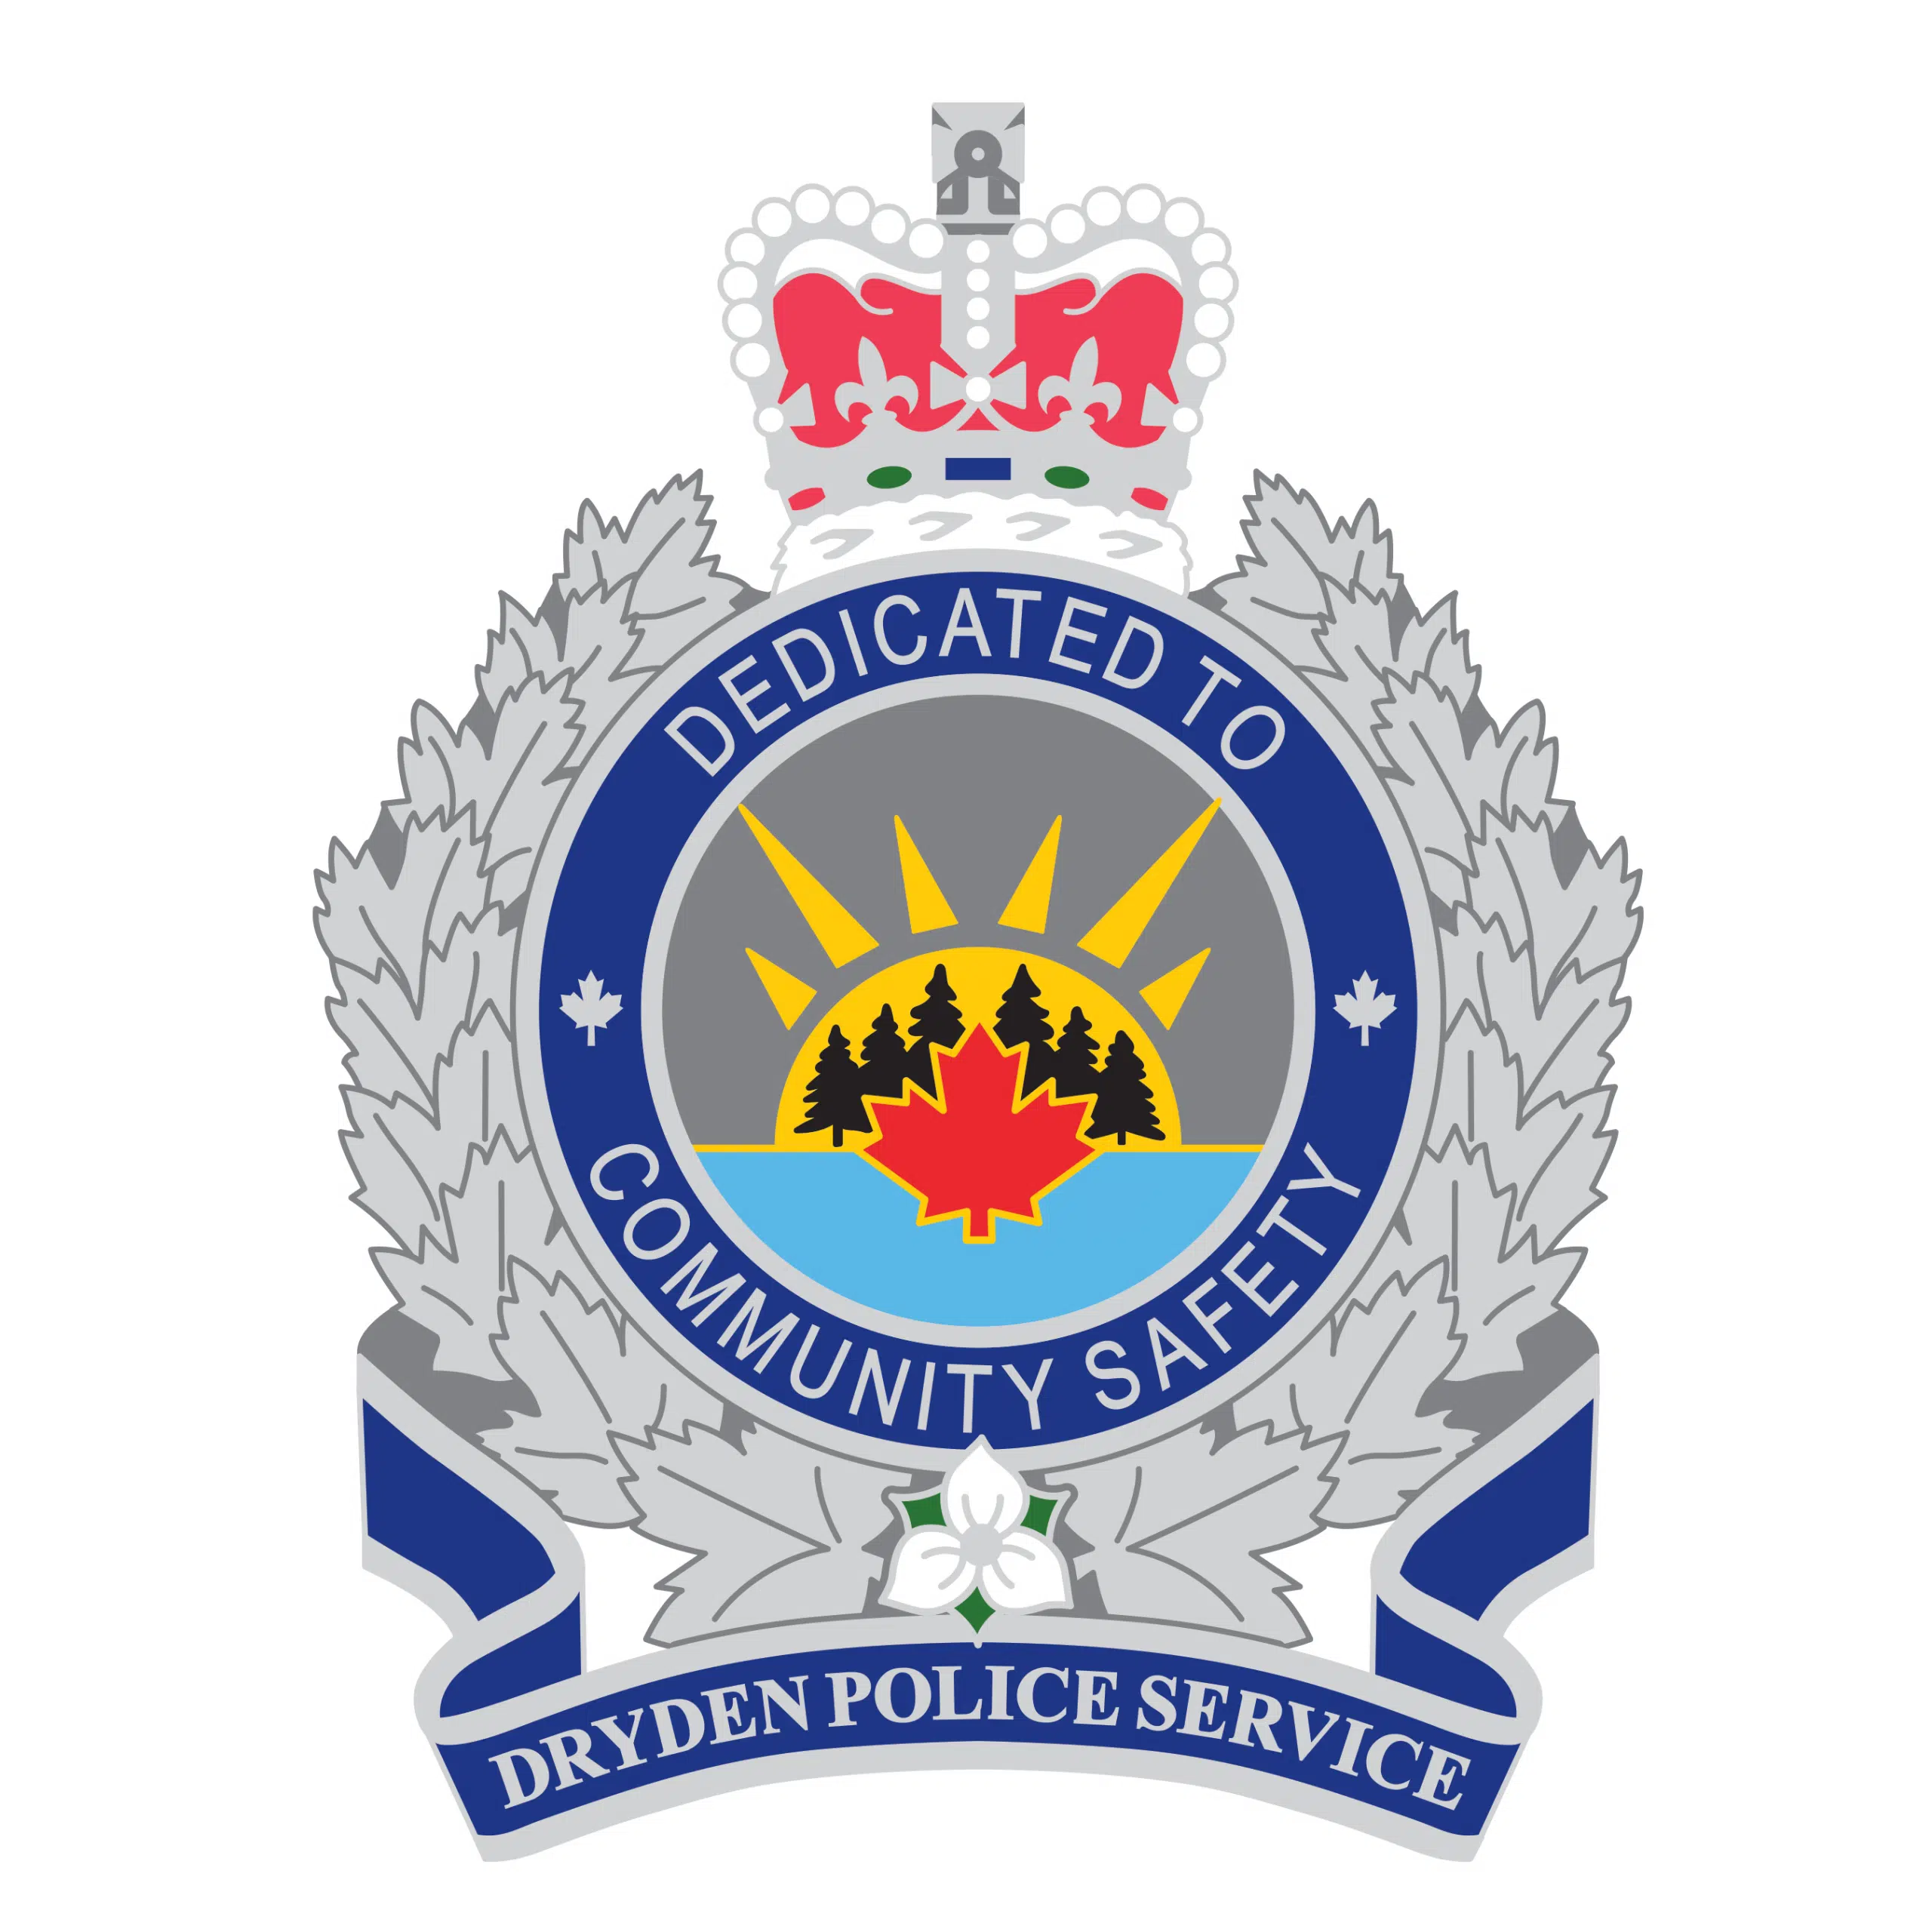 Dryden Police Looking At Fluctuating Numbers For May